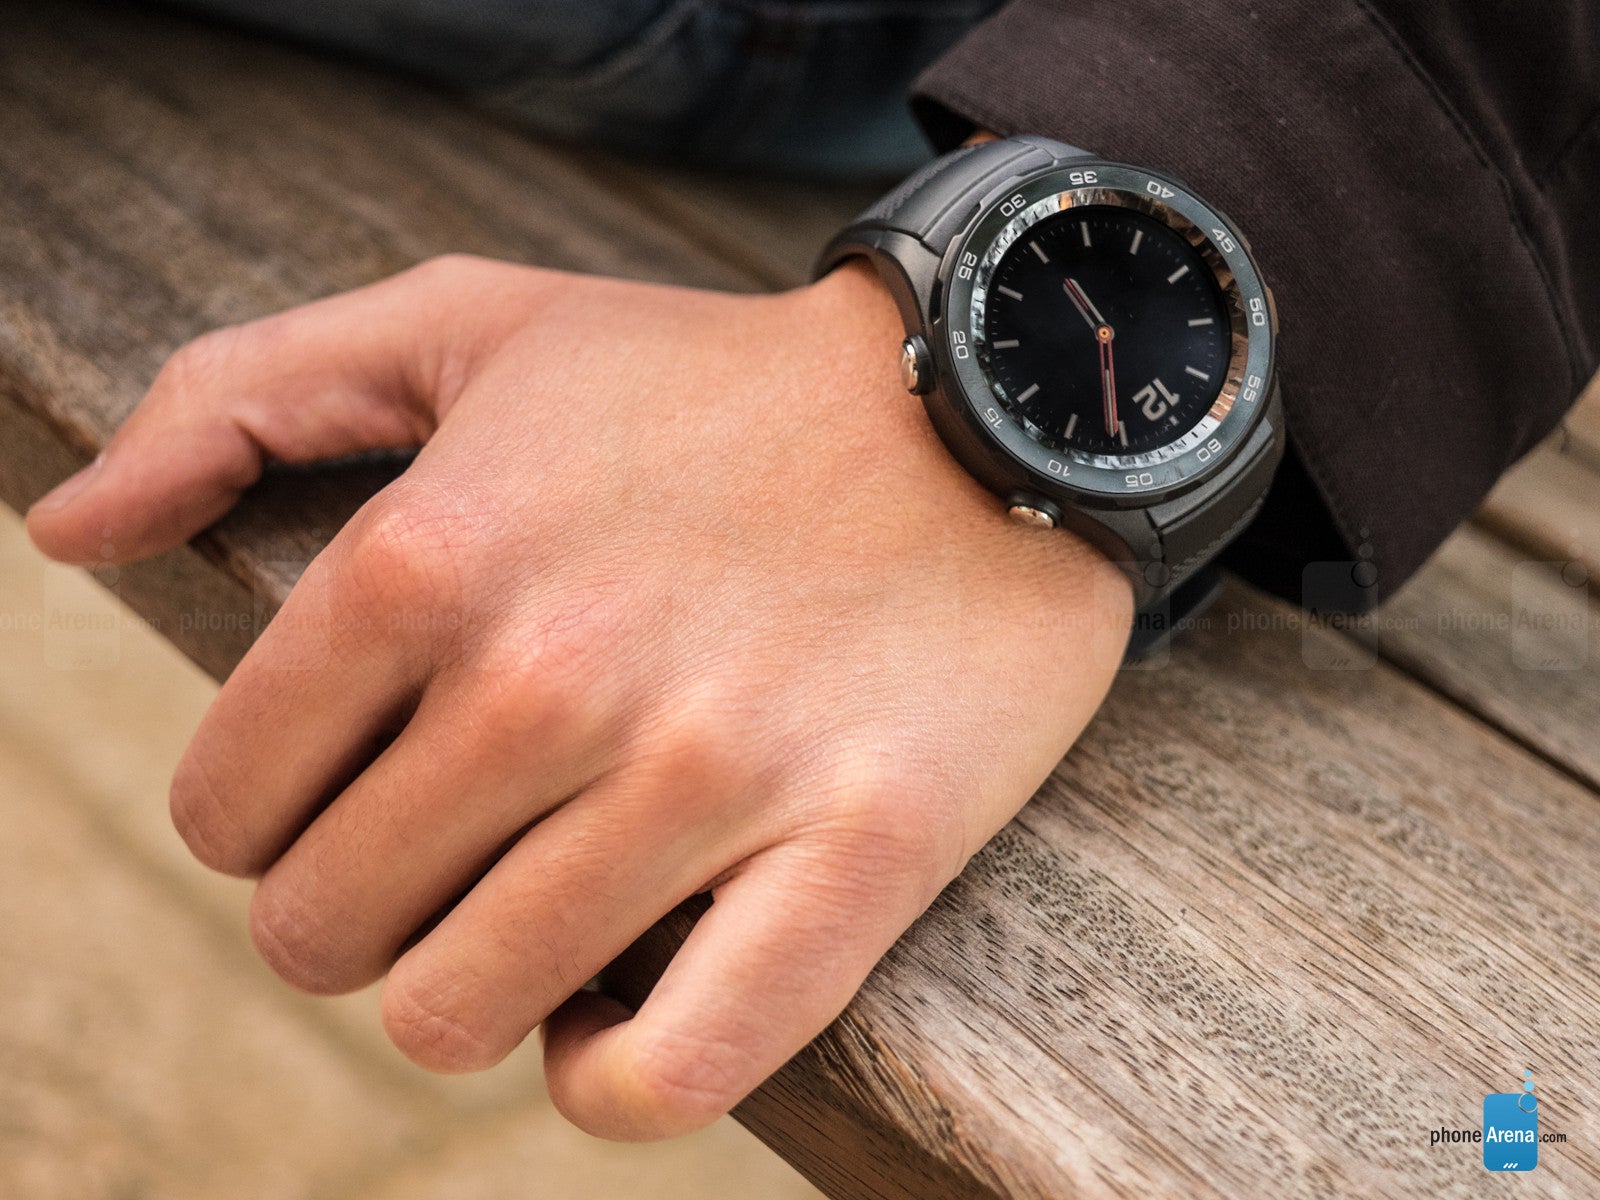 Huawei Watch 2 hands-on: My wrists are way too small for that